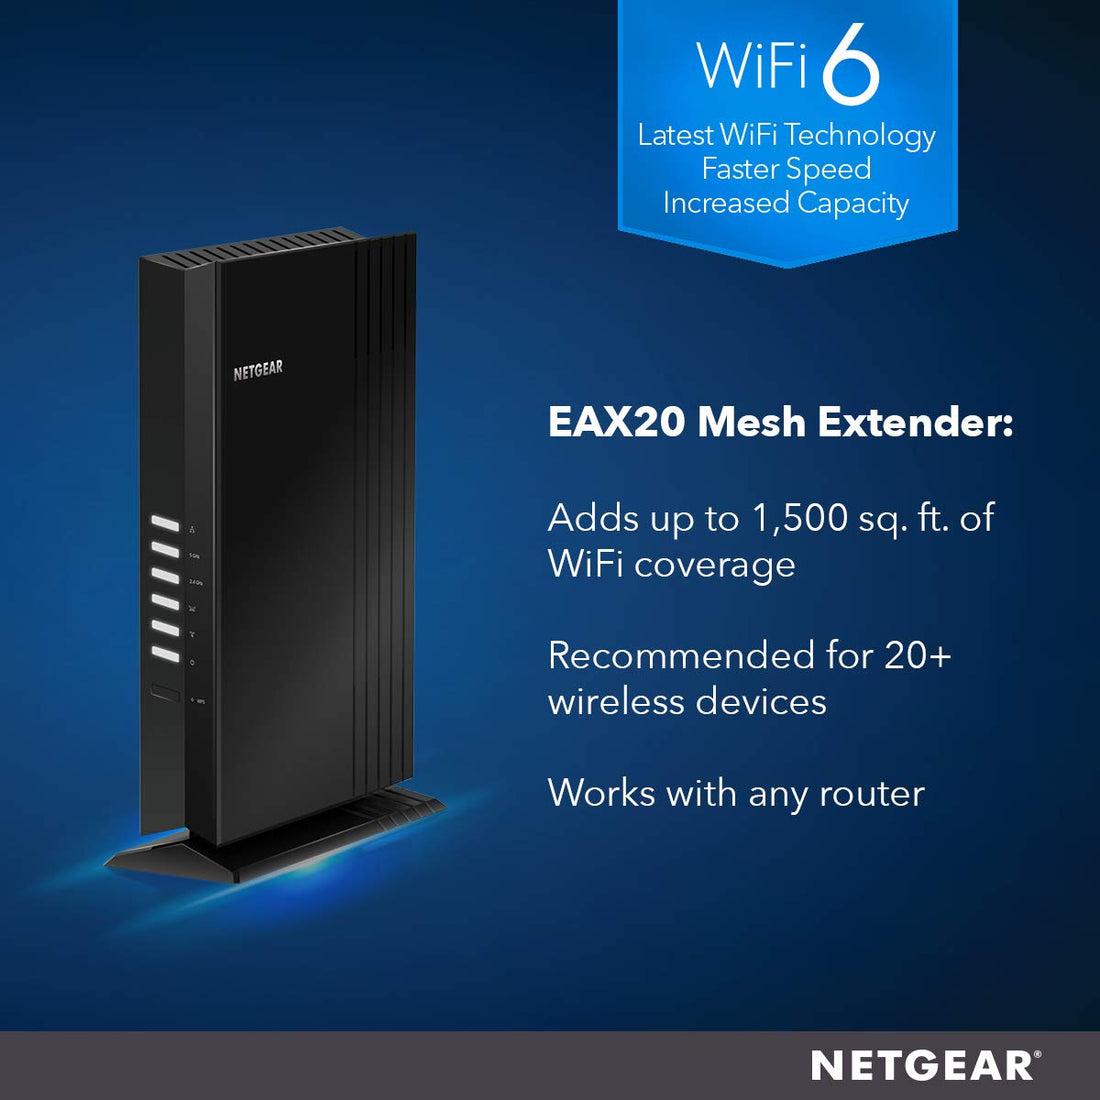 NETGEAR WiFi 6 Mesh Range Extender (EAX20) - Add up to 1,500 sq. ft. and 20+ Devices with AX1800 Dual-Band Wireless Signal Booster & Repeater (up to 1.8Gbps Speed), Plus Smart Roaming